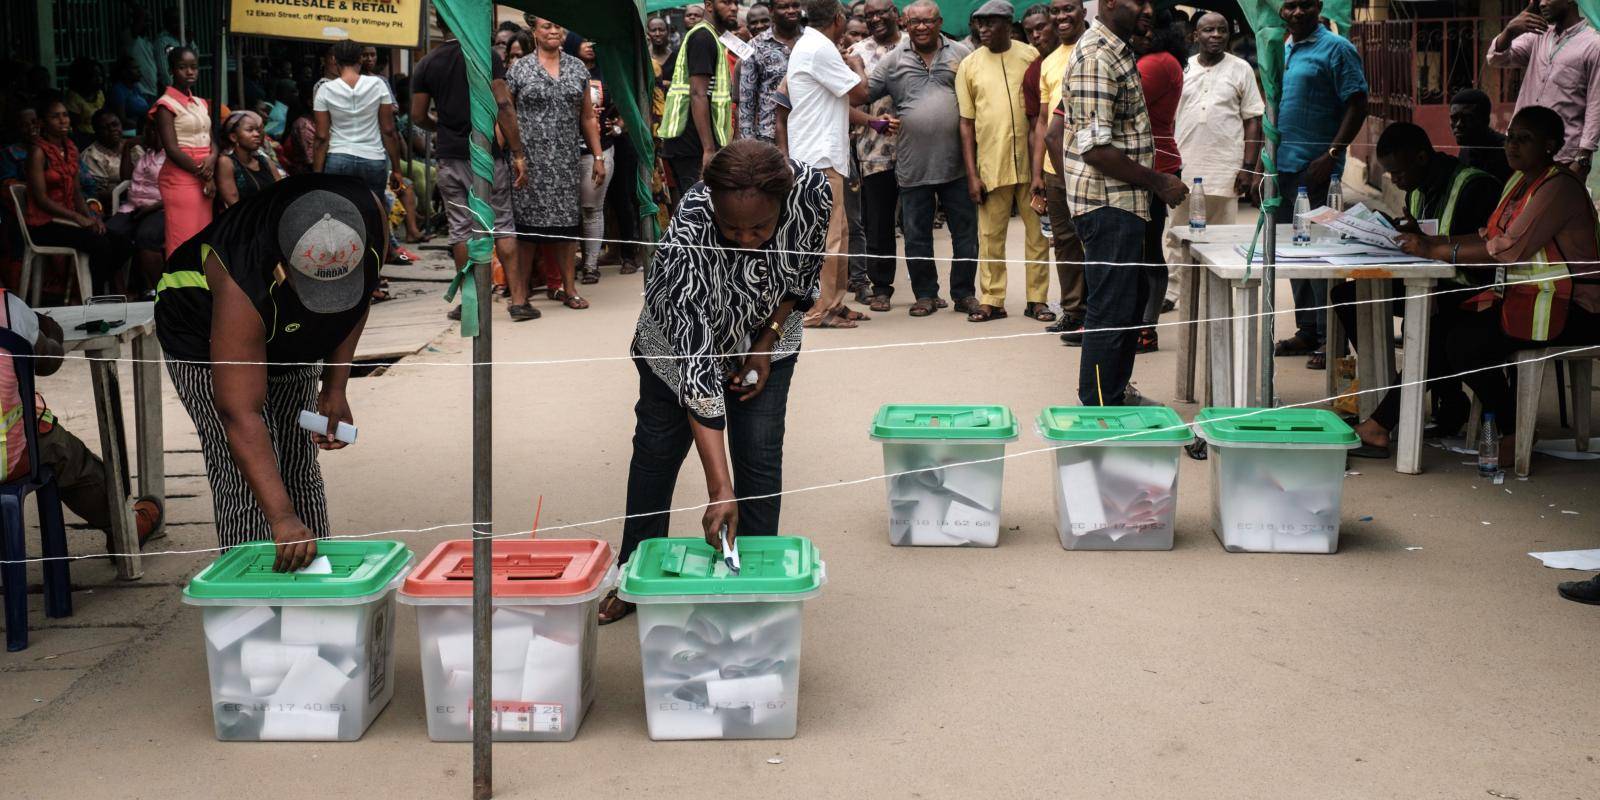 People place folded ballot papers in boxes on the ground.